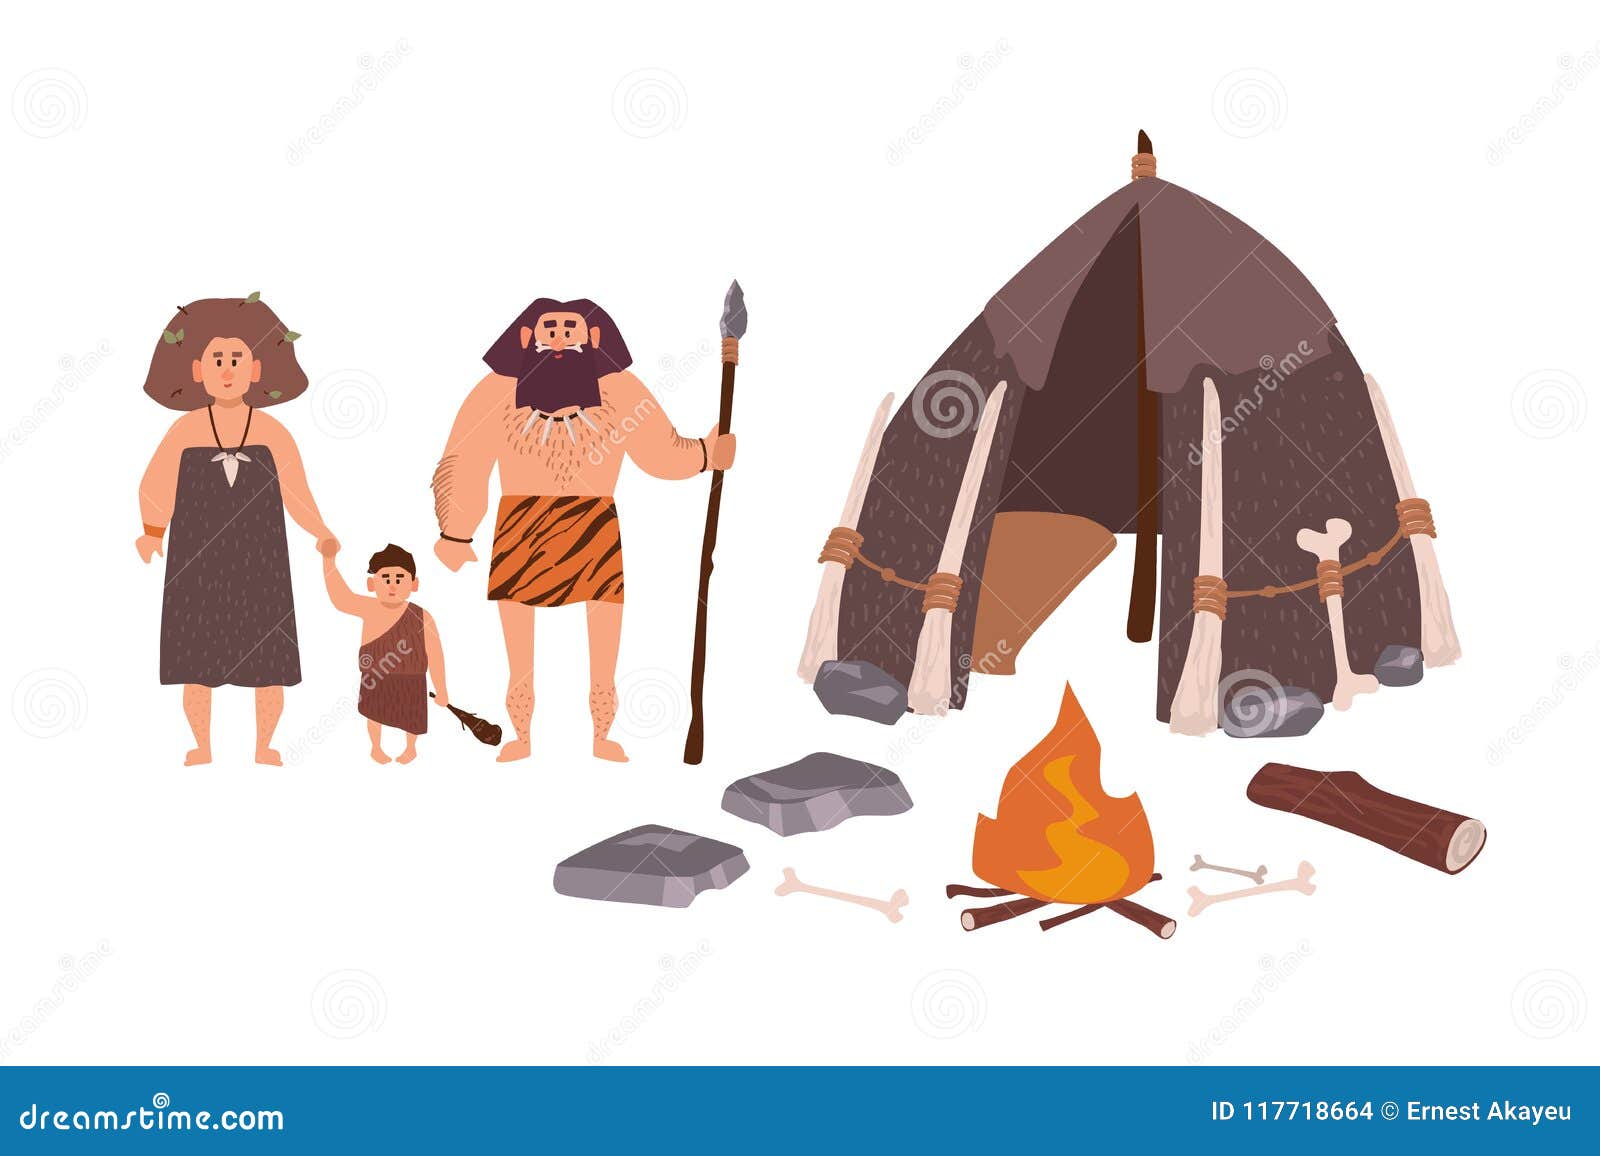 family of ancient people, cavemen, primitive men or archaic human. mother, father and son standing beside their dwelling